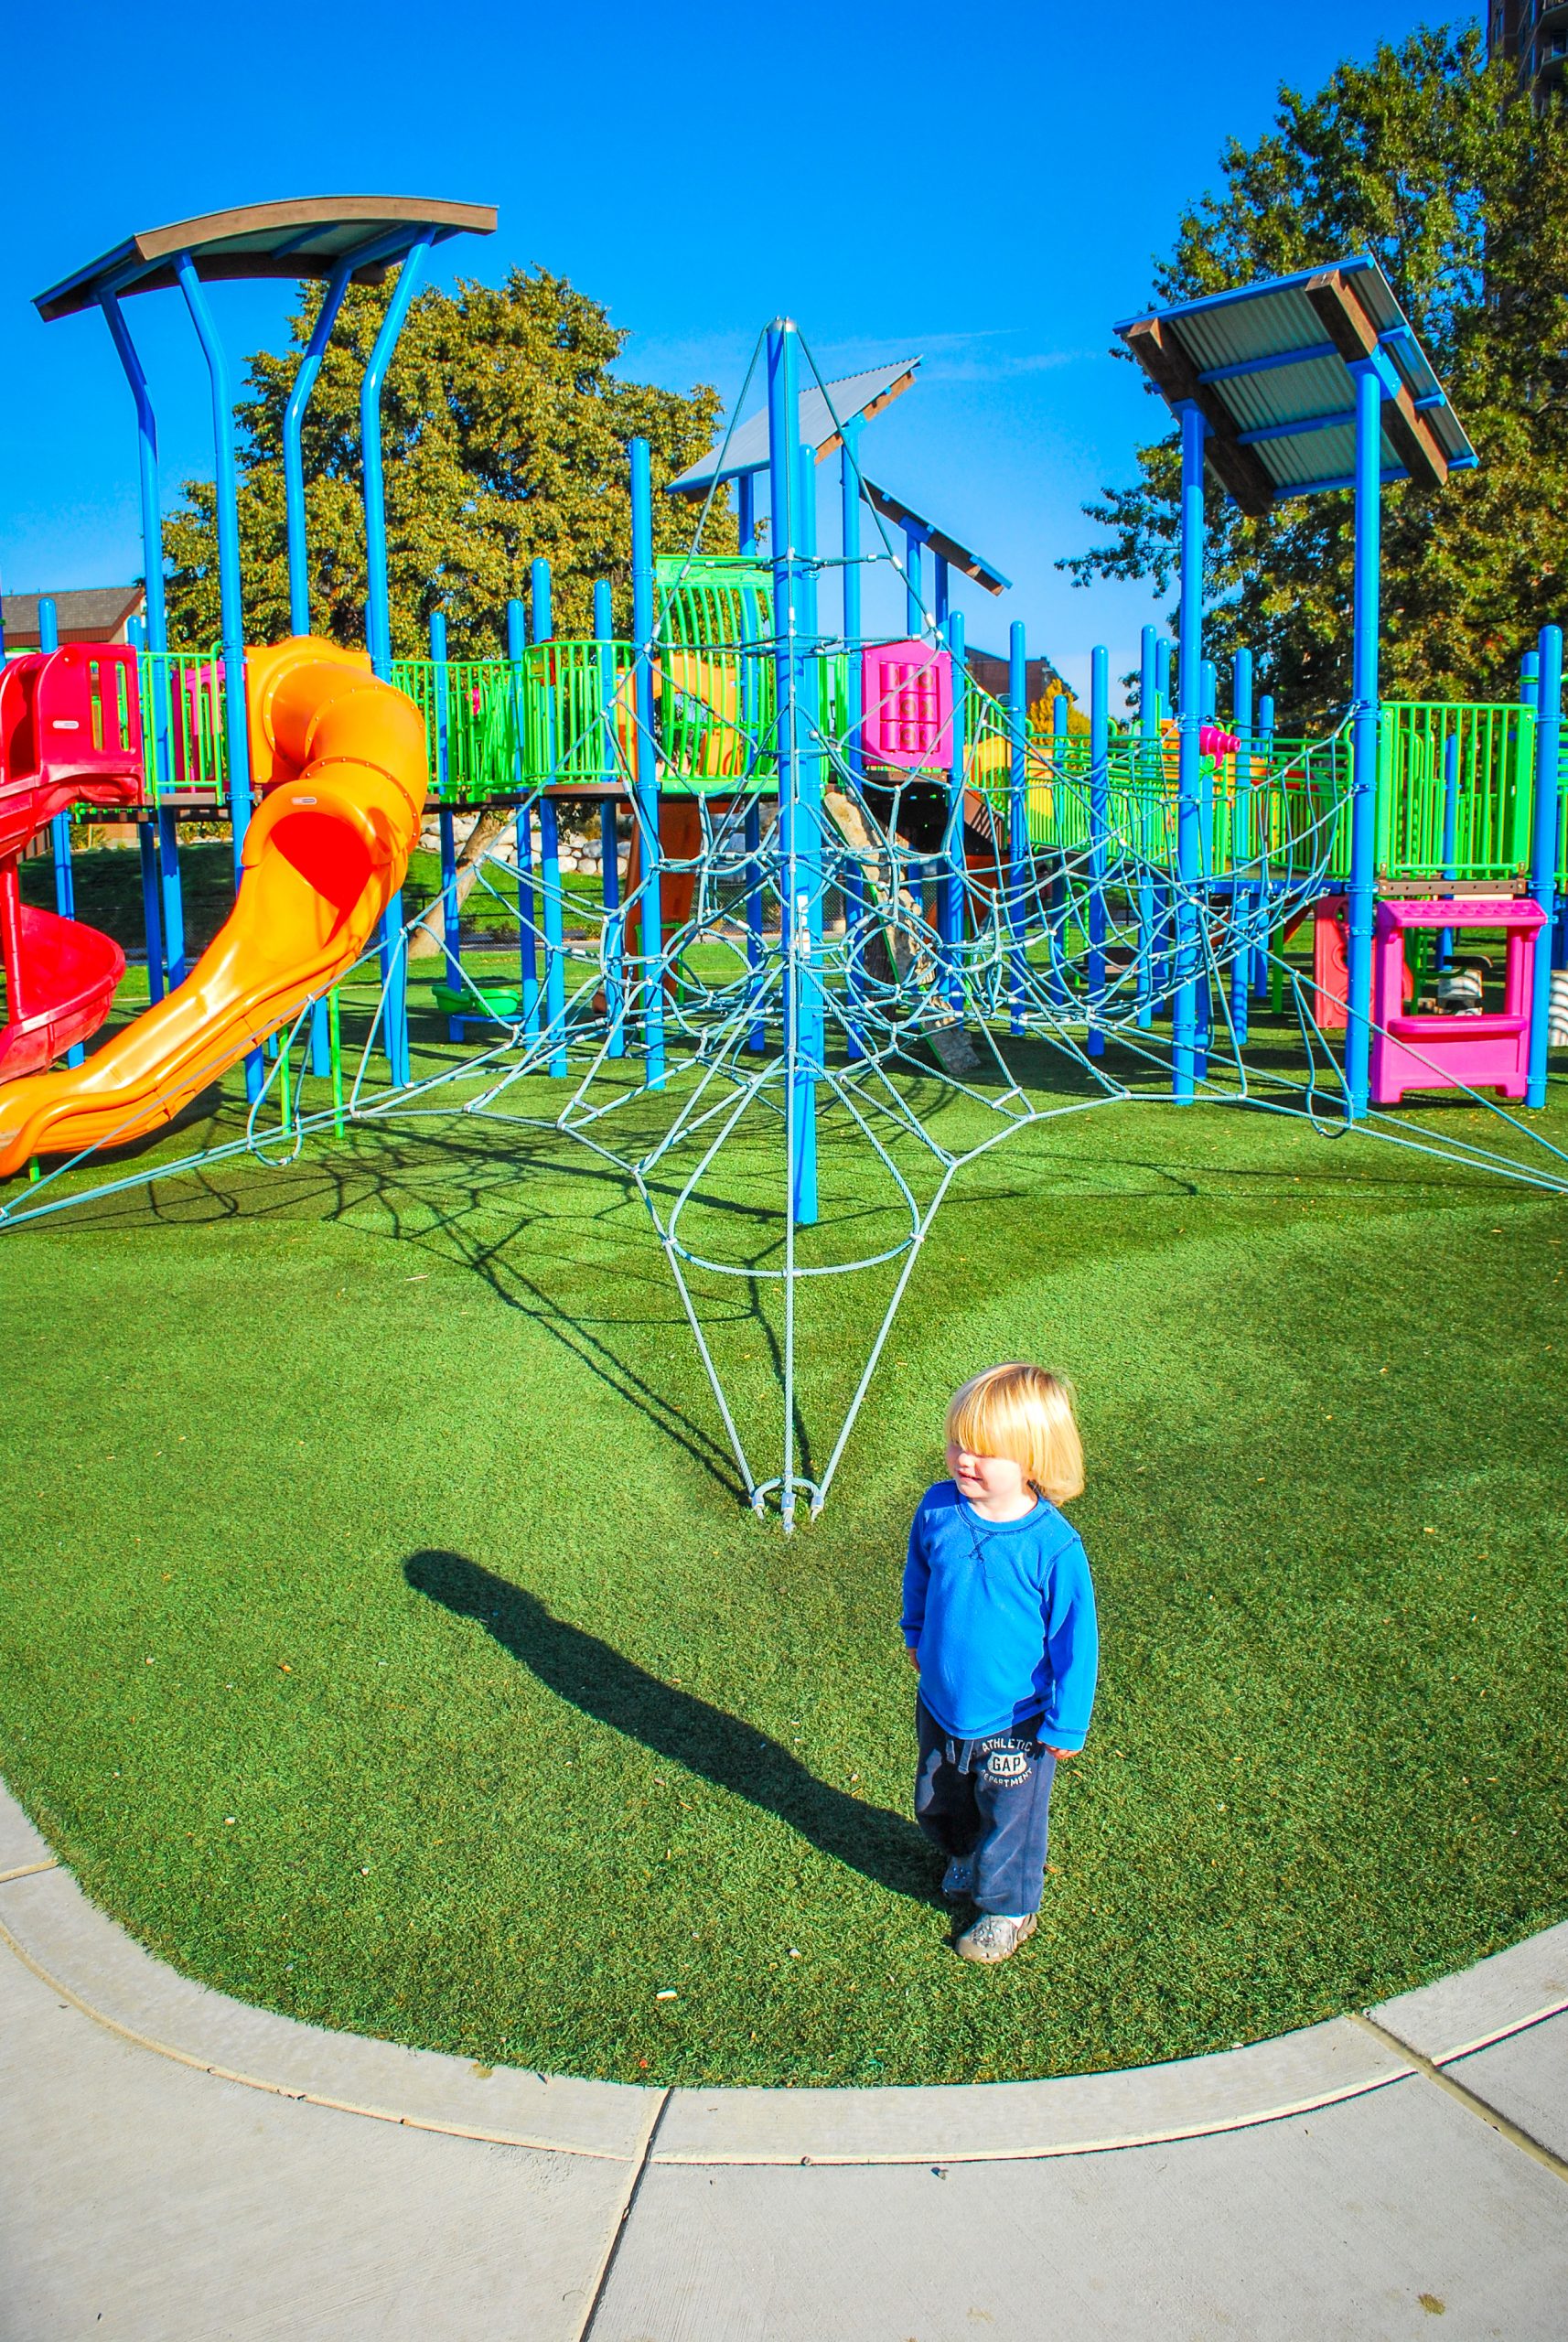 The McEuen Park Redevelopment was a collaborative project that features an ADA playground, splash pad, bike/pedestrian paths, open green space, grand pavillion, restrooms, dog park, subterranean parking structure, hardscape courts, lighting, and public art.